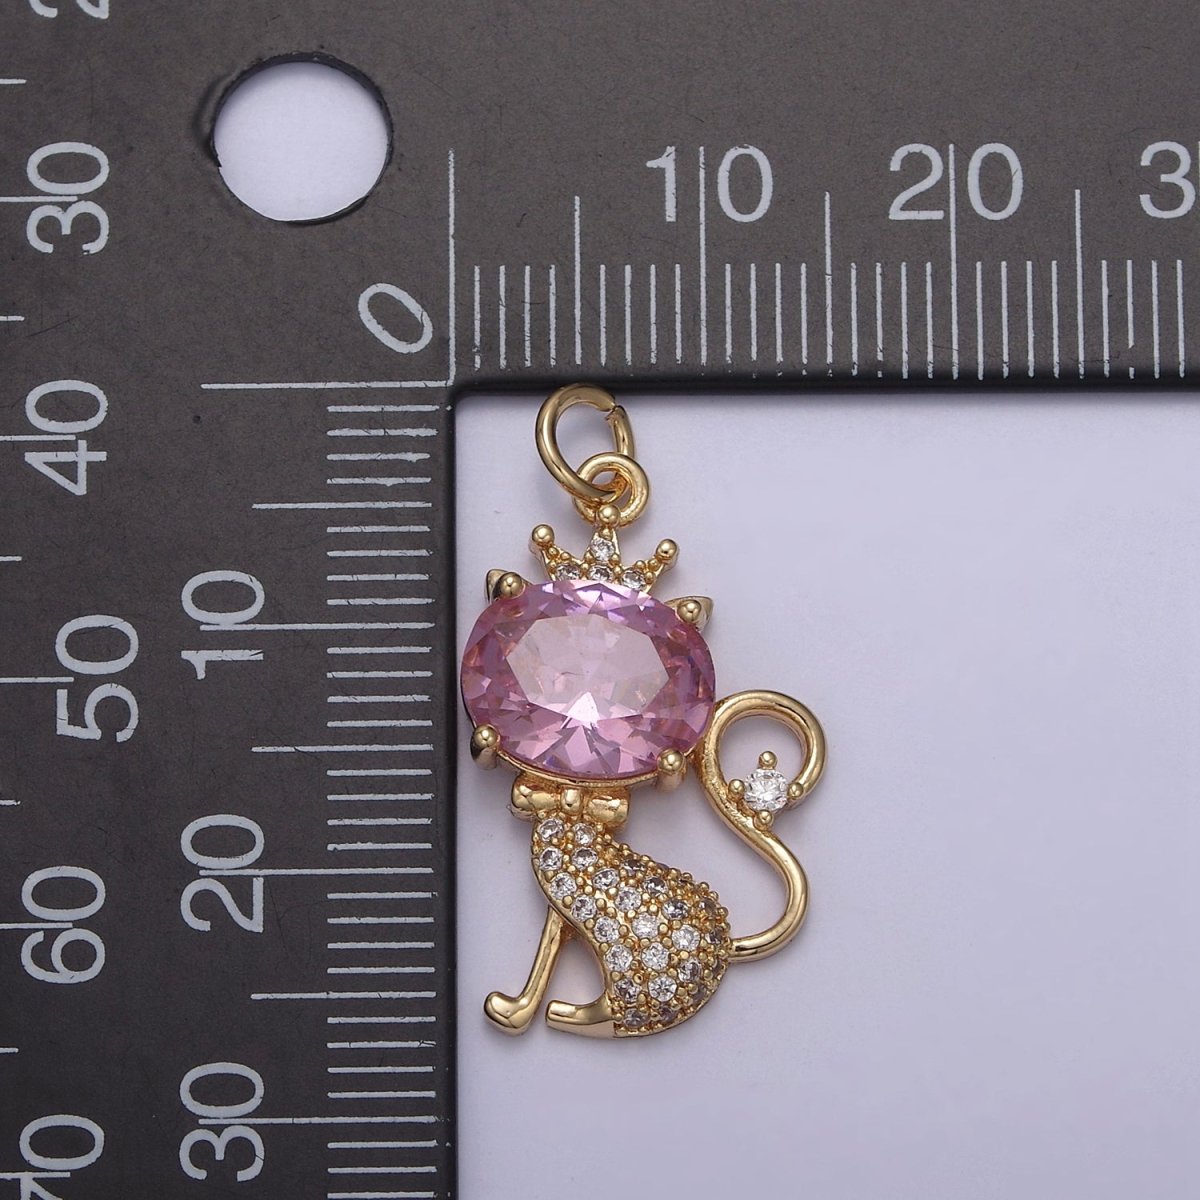 18K Gold Filled Cat Charm, Kitten Charm, Pink CZ Micro Pave Crystal Charm, Gold Cat Charm, Simple Cat Charm N-835 - DLUXCA